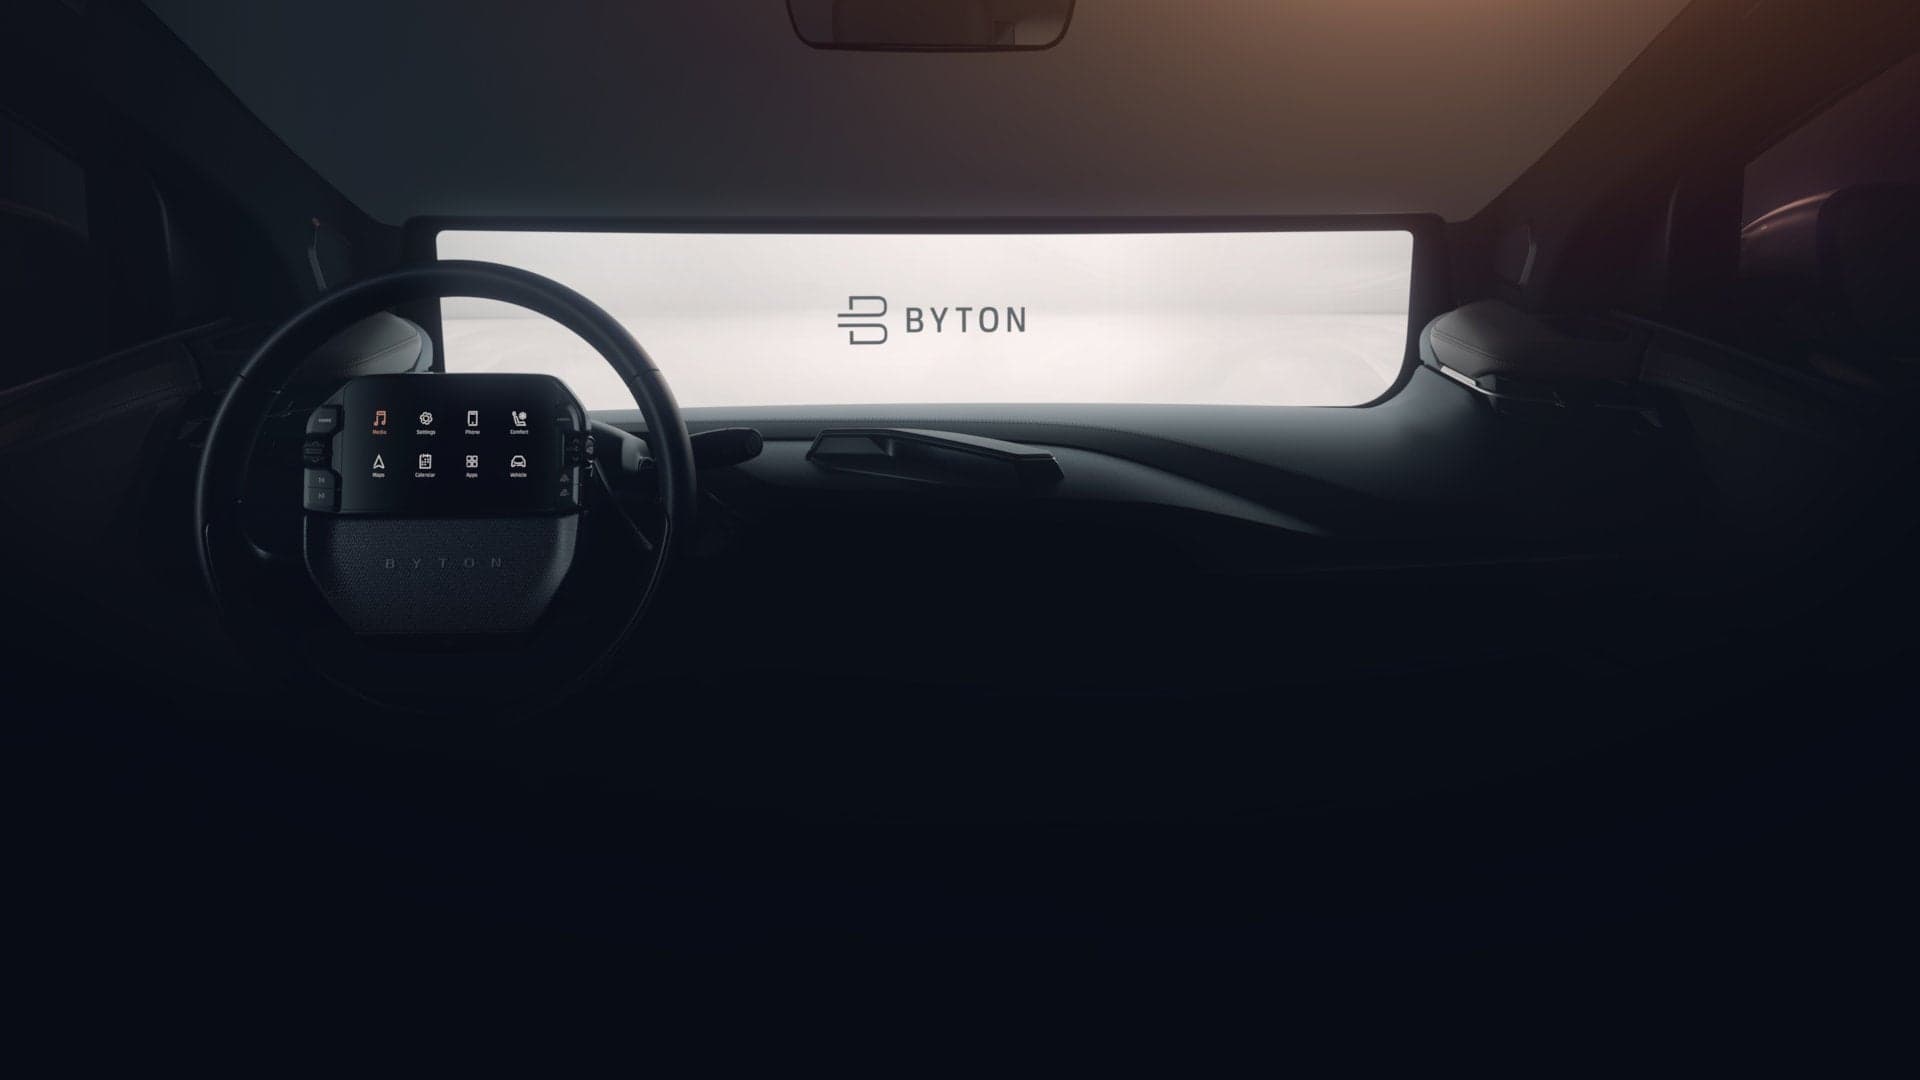 Byton Is Showcasing Its Massive 49-Inch Infotainment Screen at CES 2019